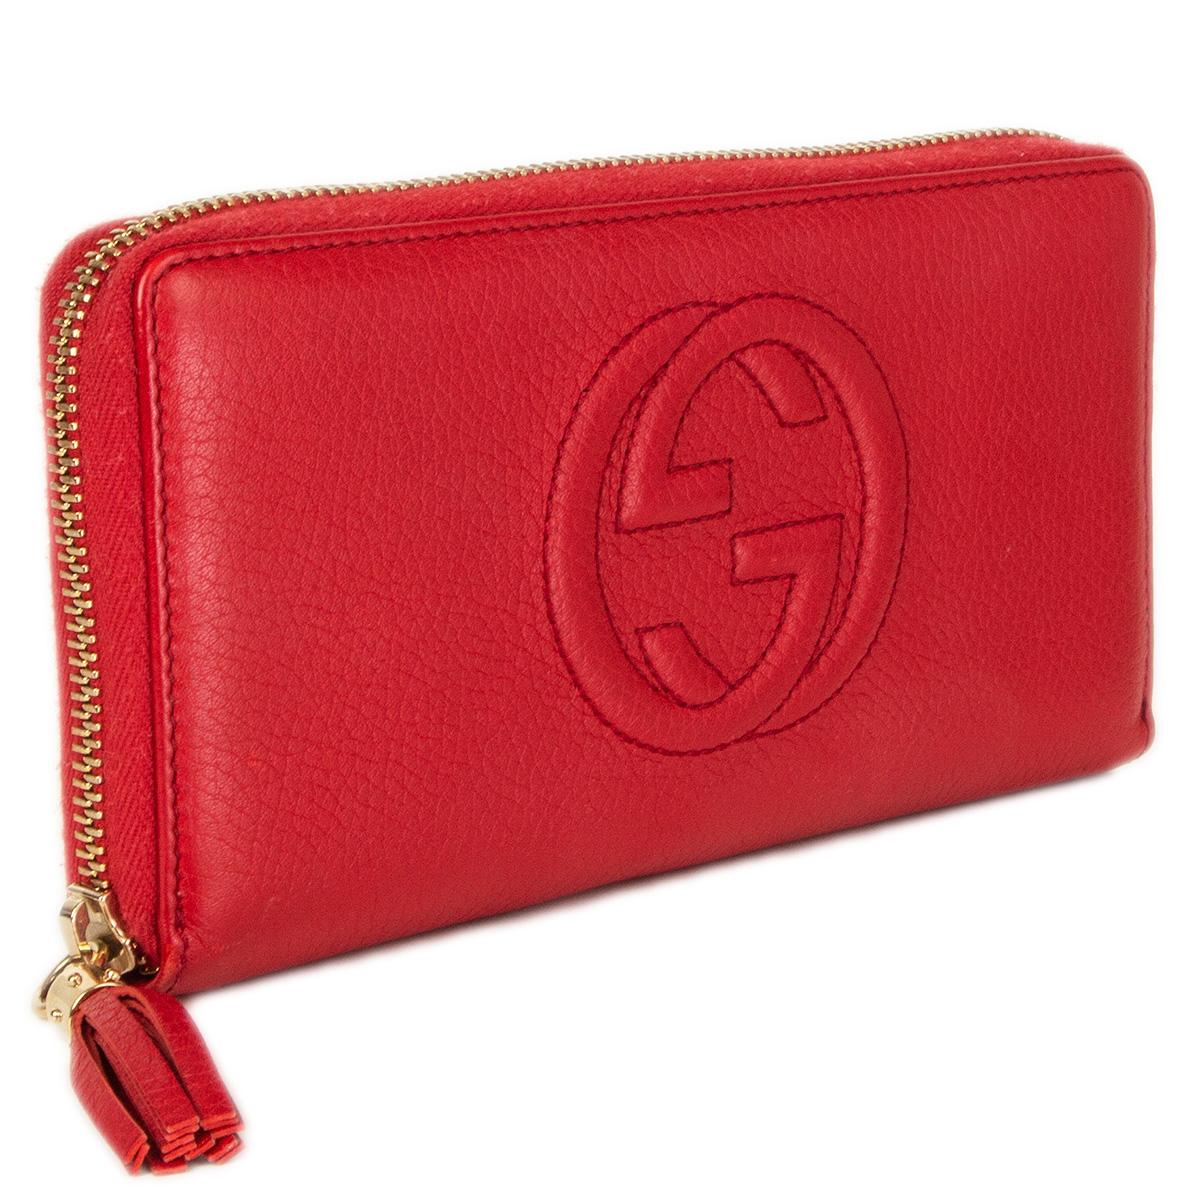 100% authentic Gucci GG Soho zipper wallet in red calfskin. Divided in three compartements and lined in calfskin and dark brown nylon with 12 card slots and one big zipper pocket. Has been carried and is in excellent condition.